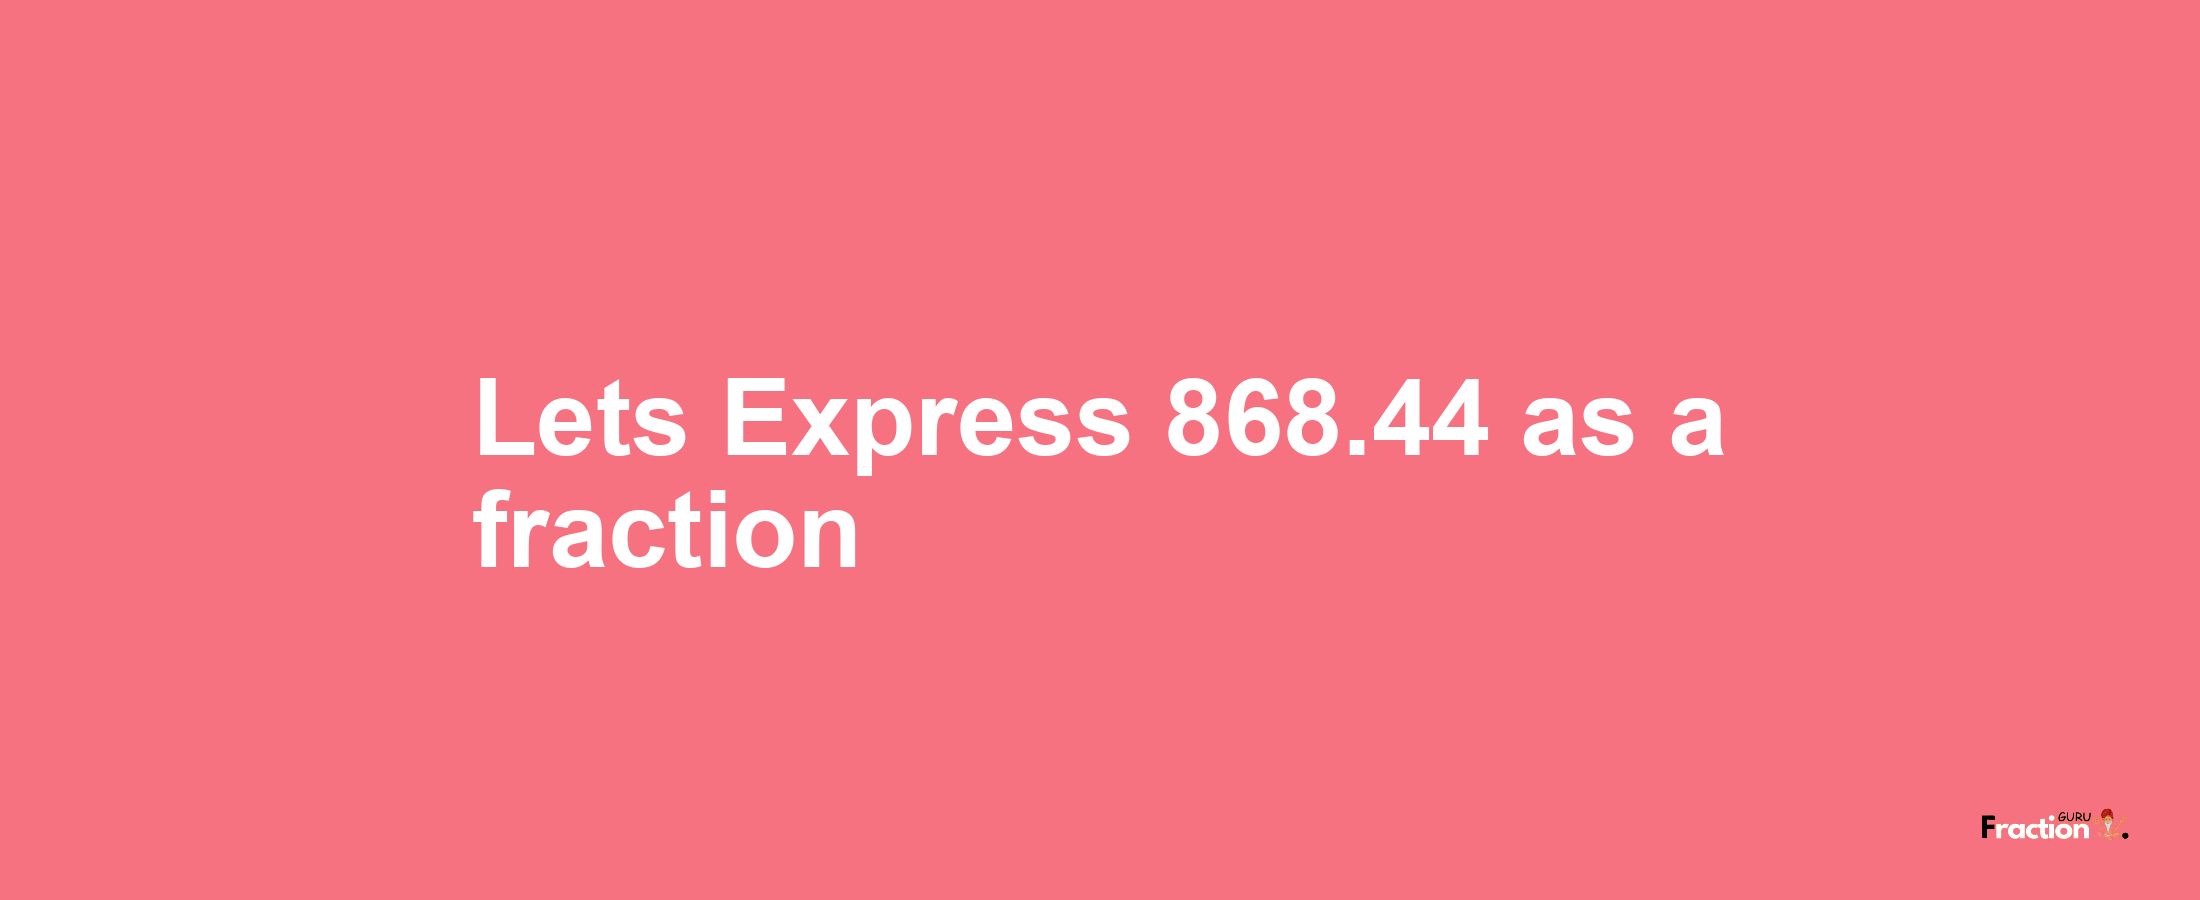 Lets Express 868.44 as afraction